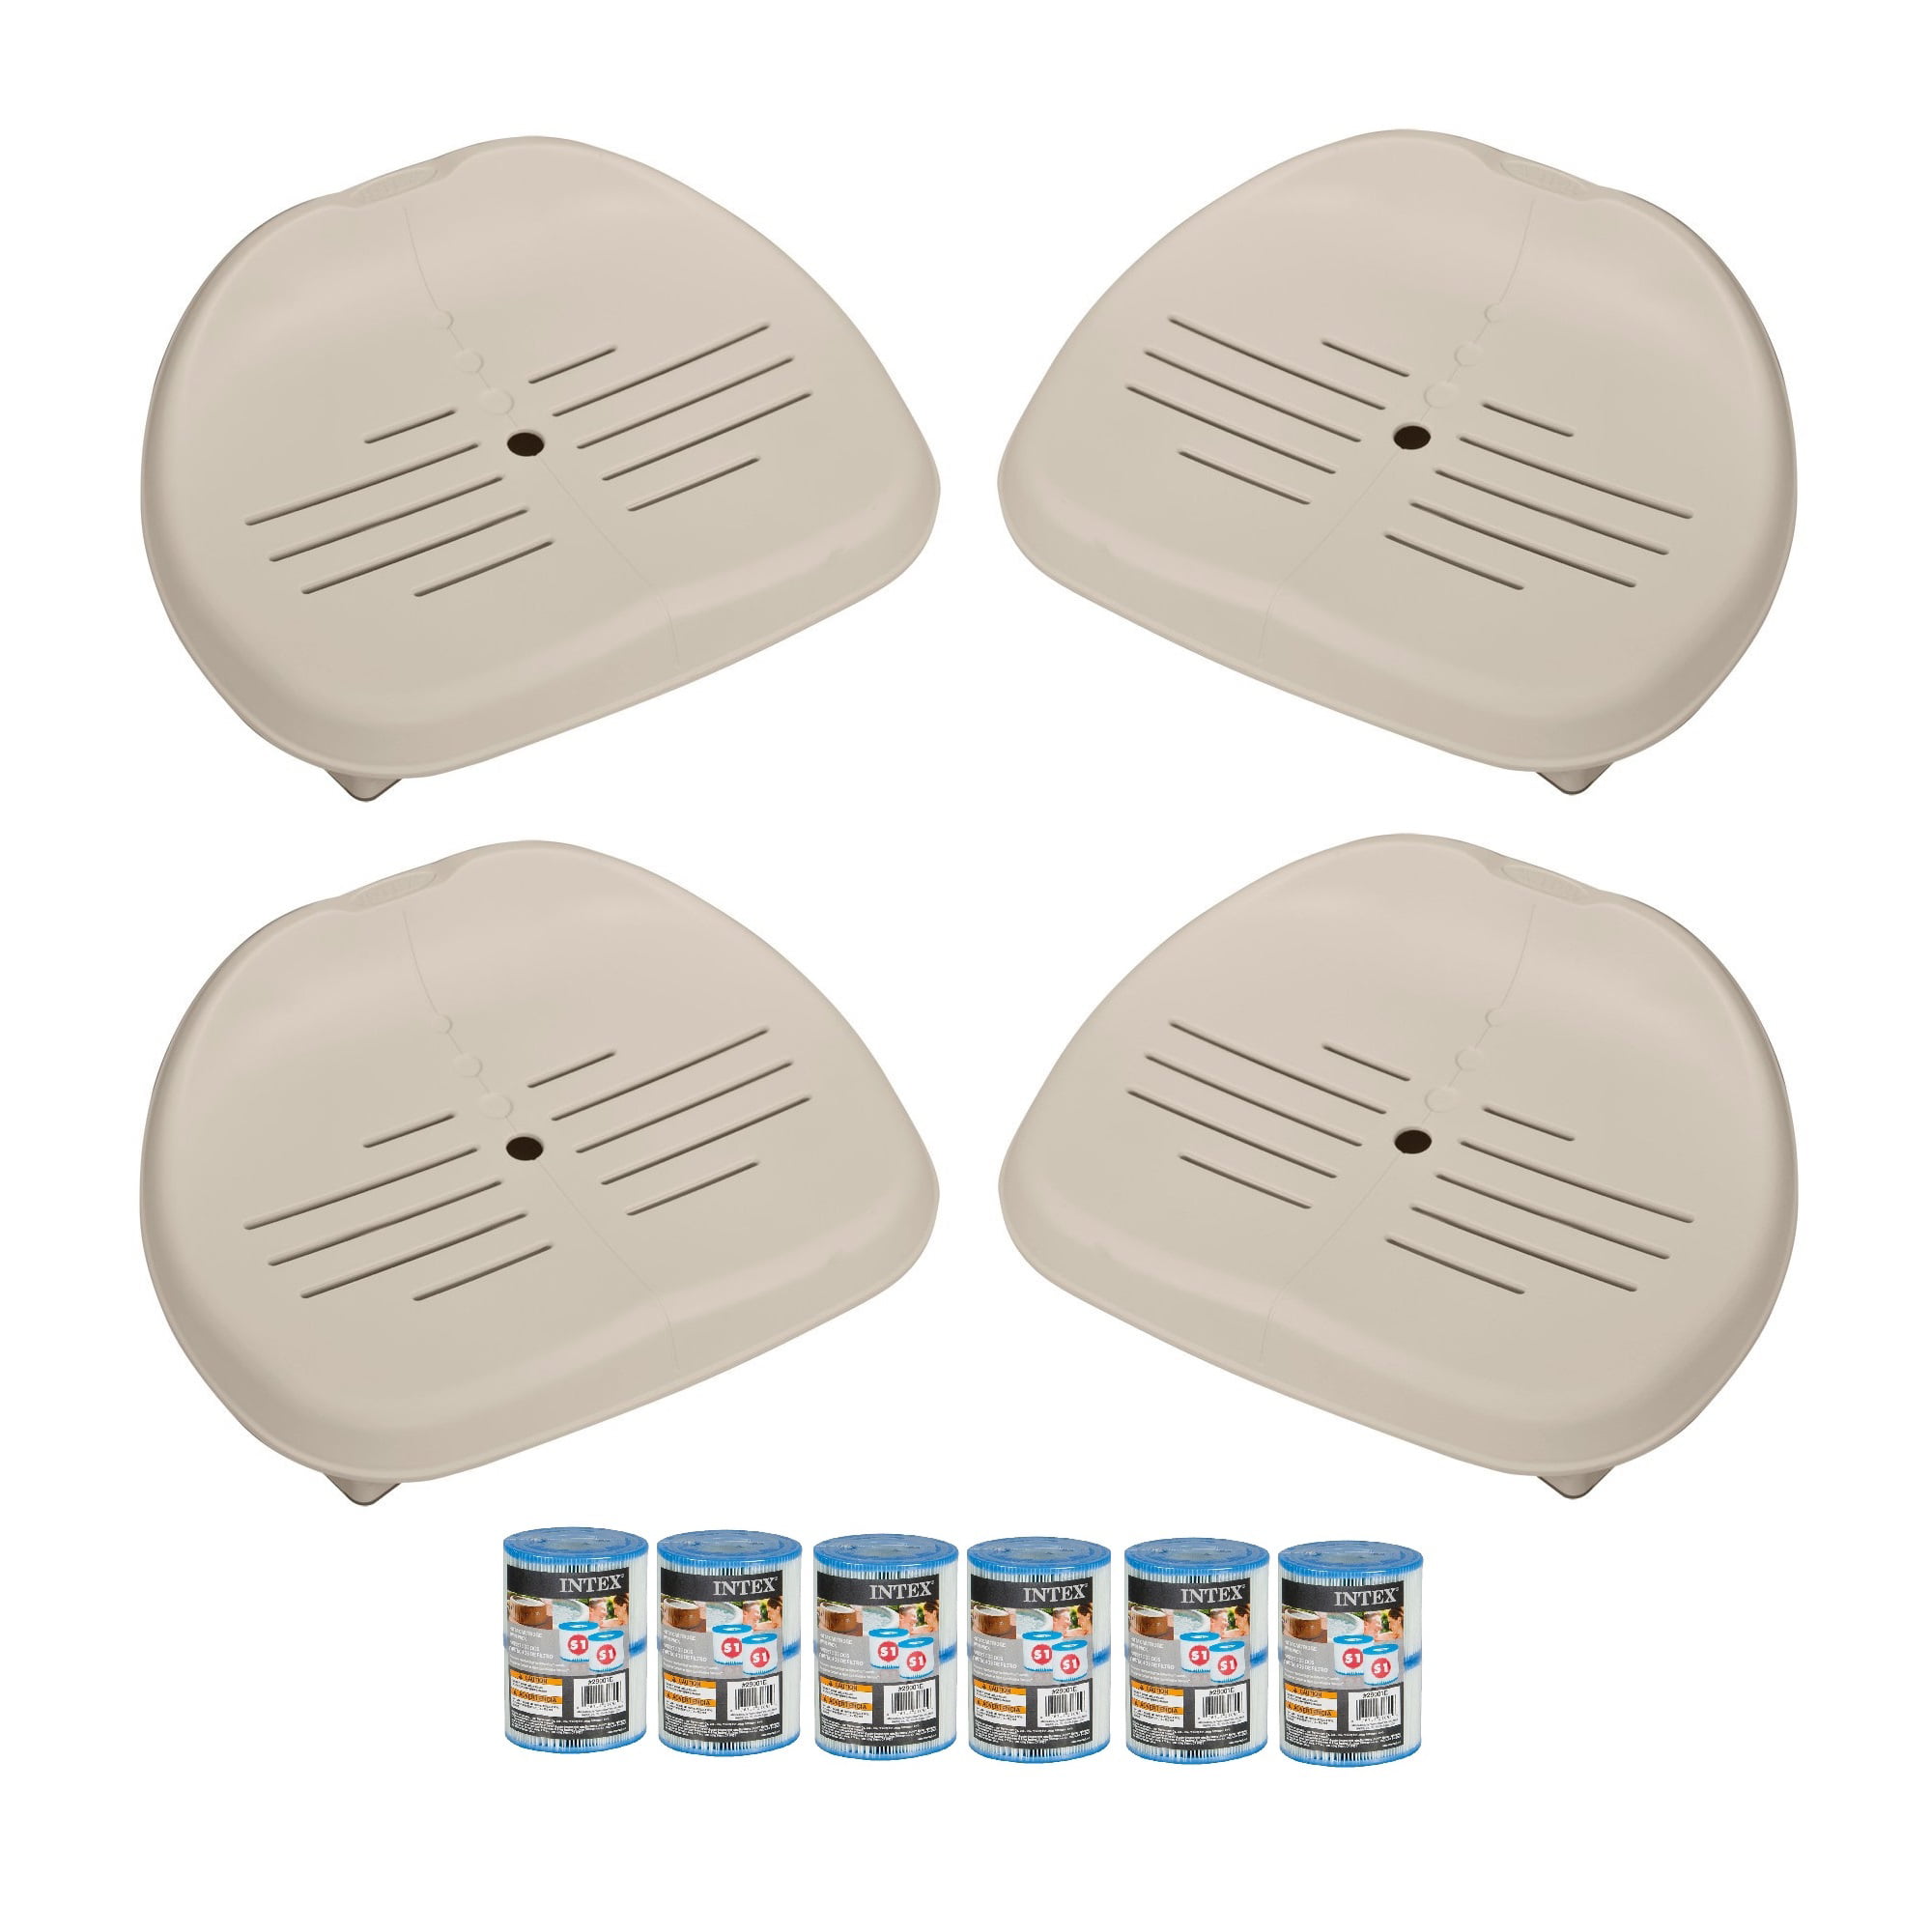 Intex Inflatable Spa Seat & Cup Holder & Type S1 Pool Filter Cartridges 6 Pack 